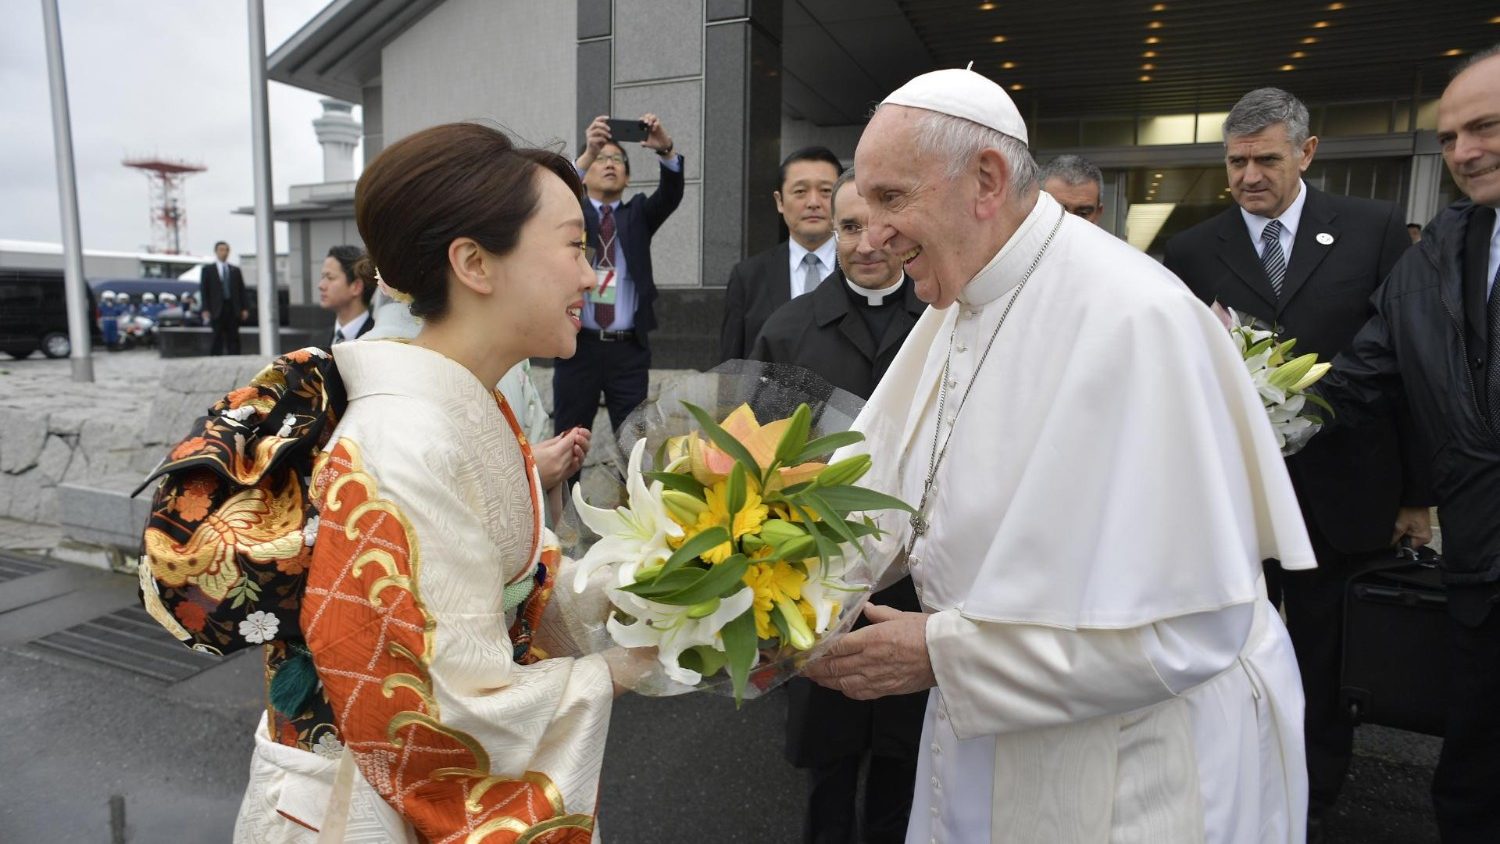 Pope farewell to Japan, leaves hearts overflowing with gratitude -